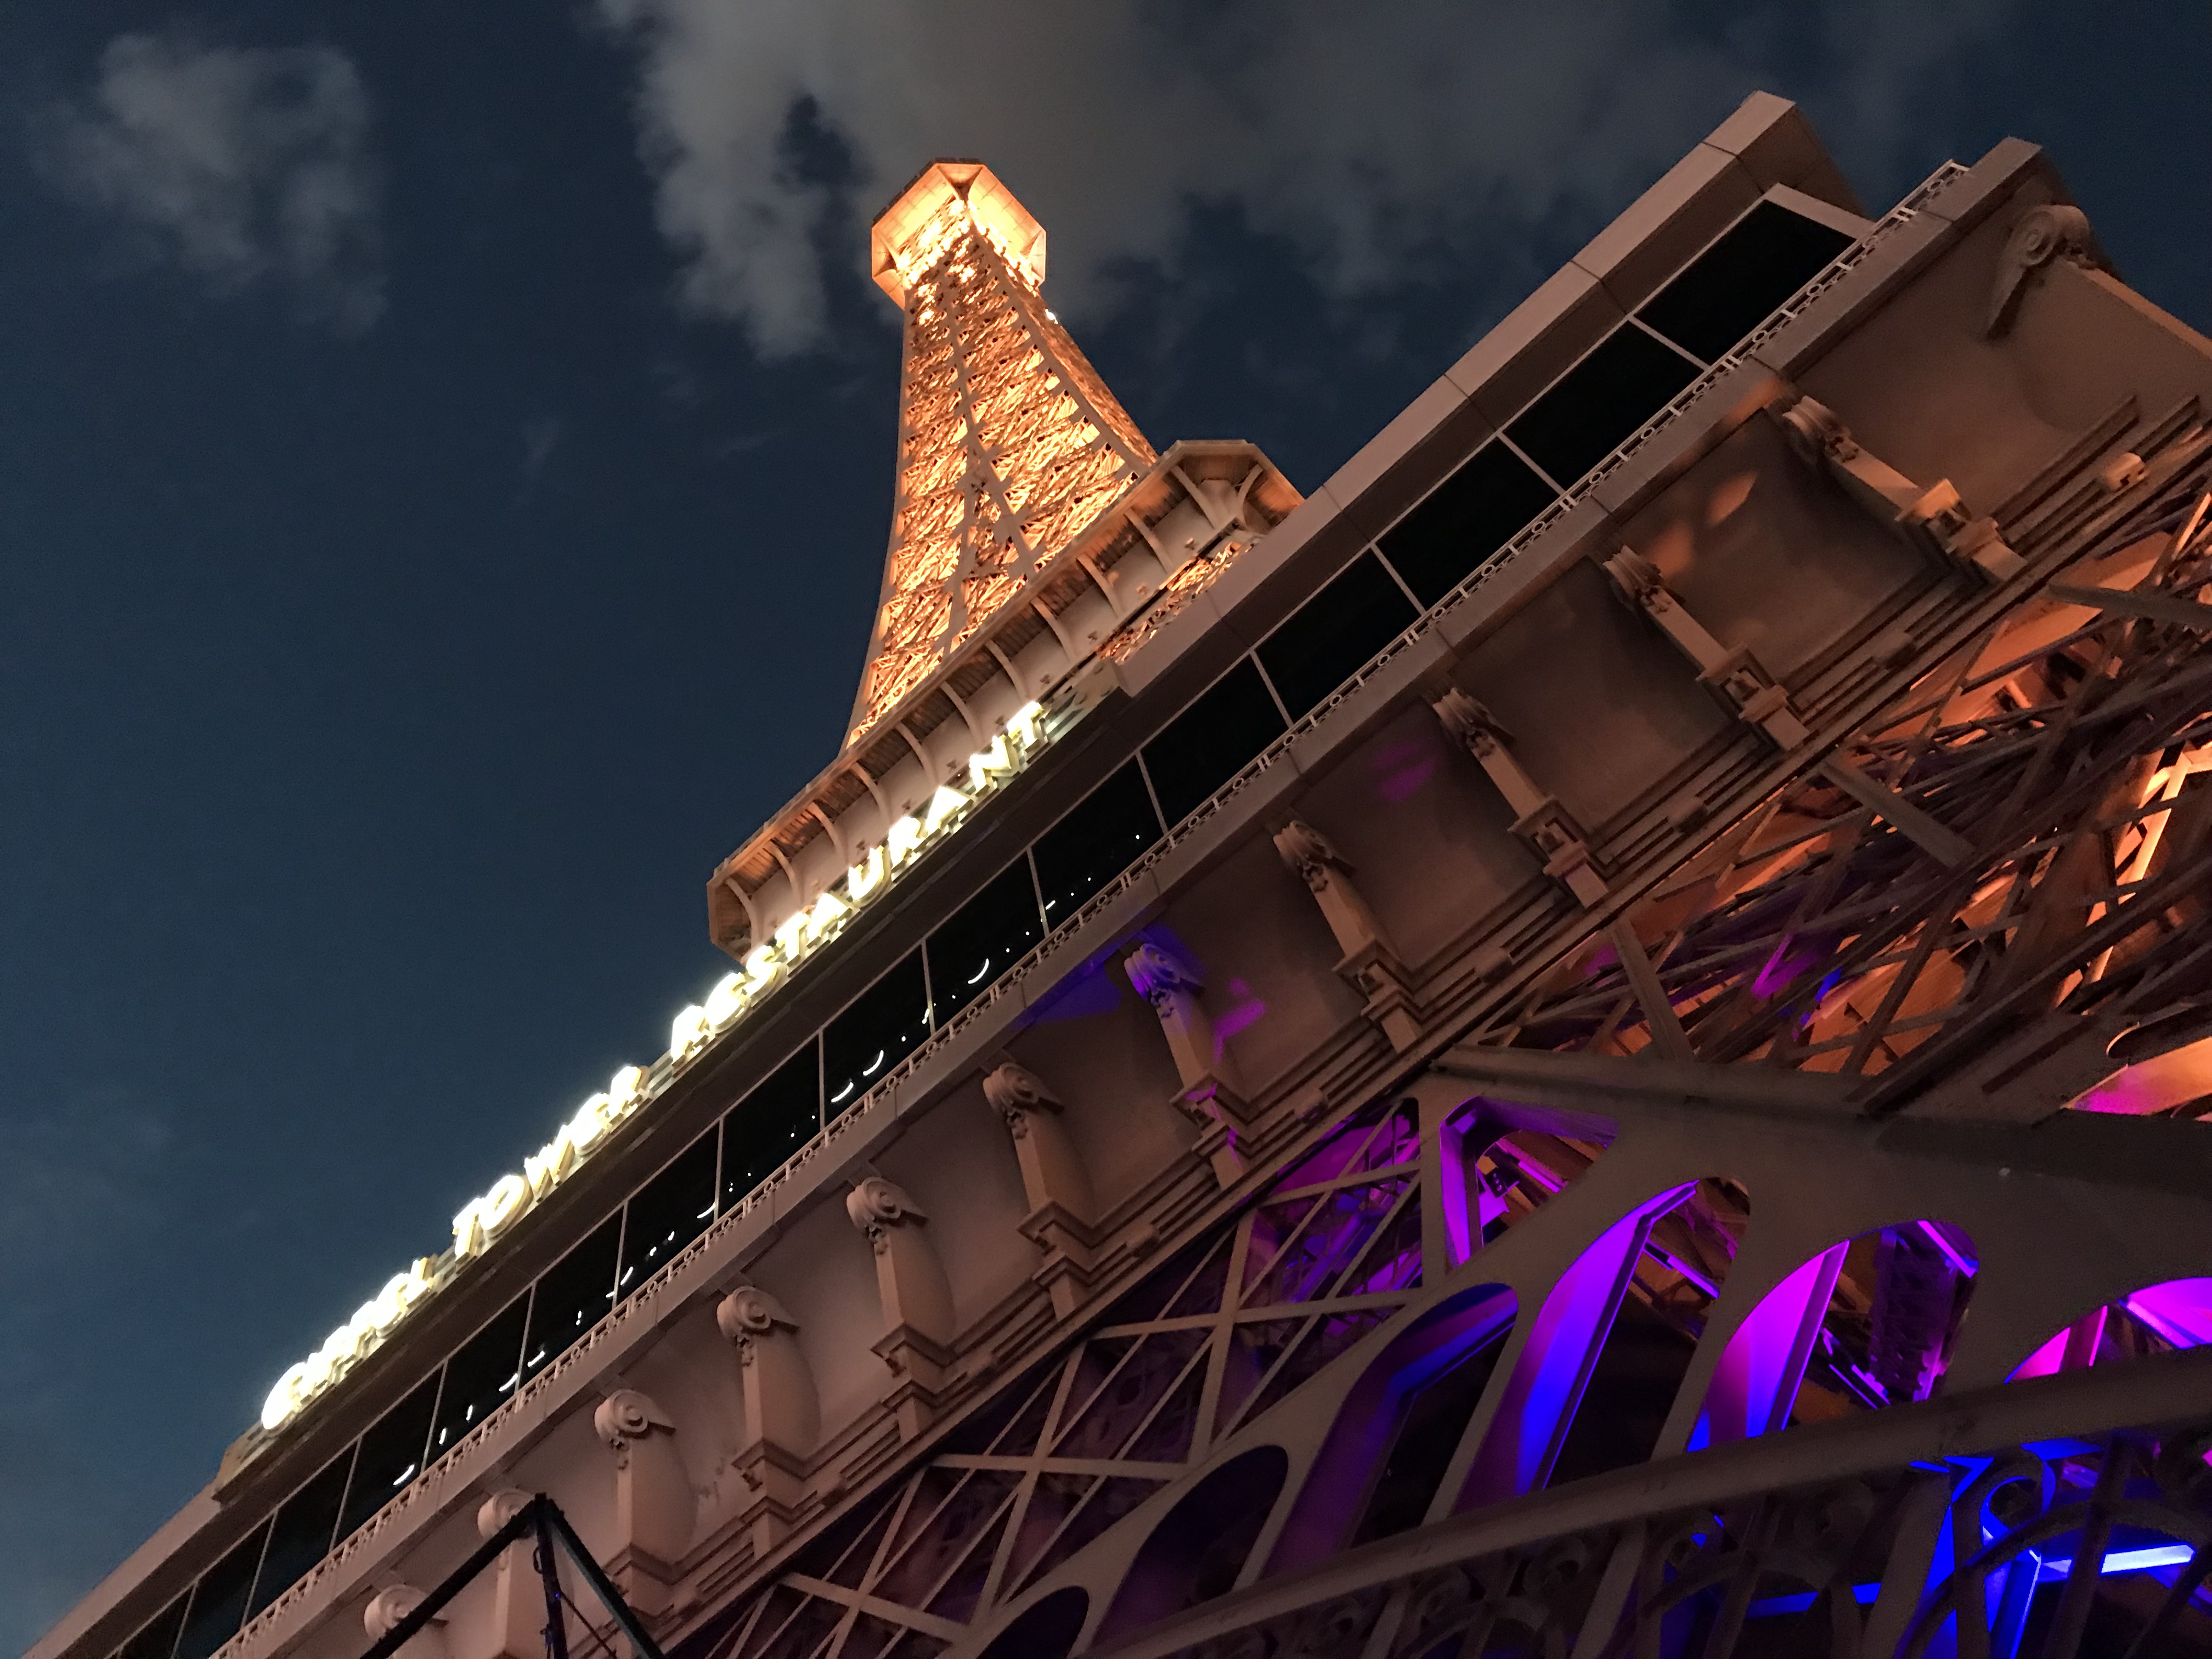 The NAMA Show party at Chateau Night Club featuring the Eiffel Tower.